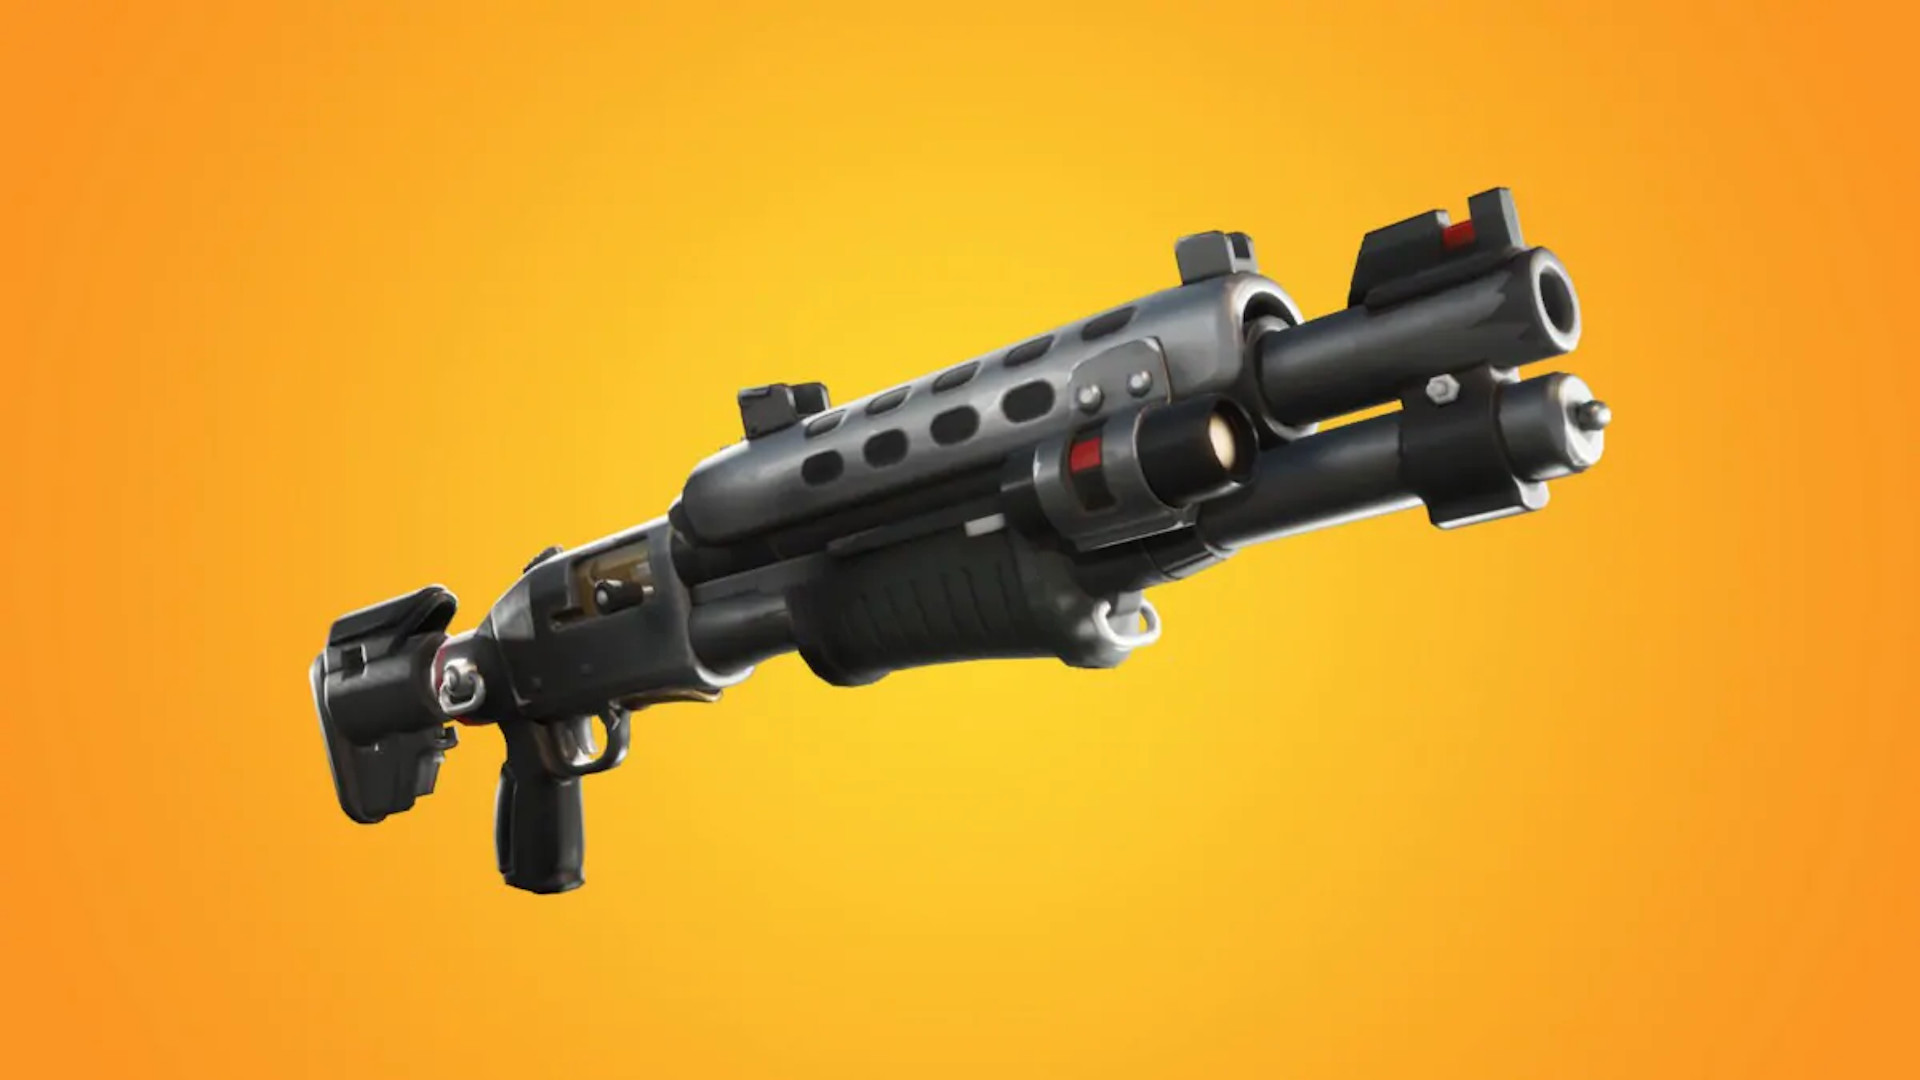 Fortnite Best In Class Weapons Fortnite Chapter 2 Season 7 Tier List The Best Weapons And How To Craft Them The Loadout